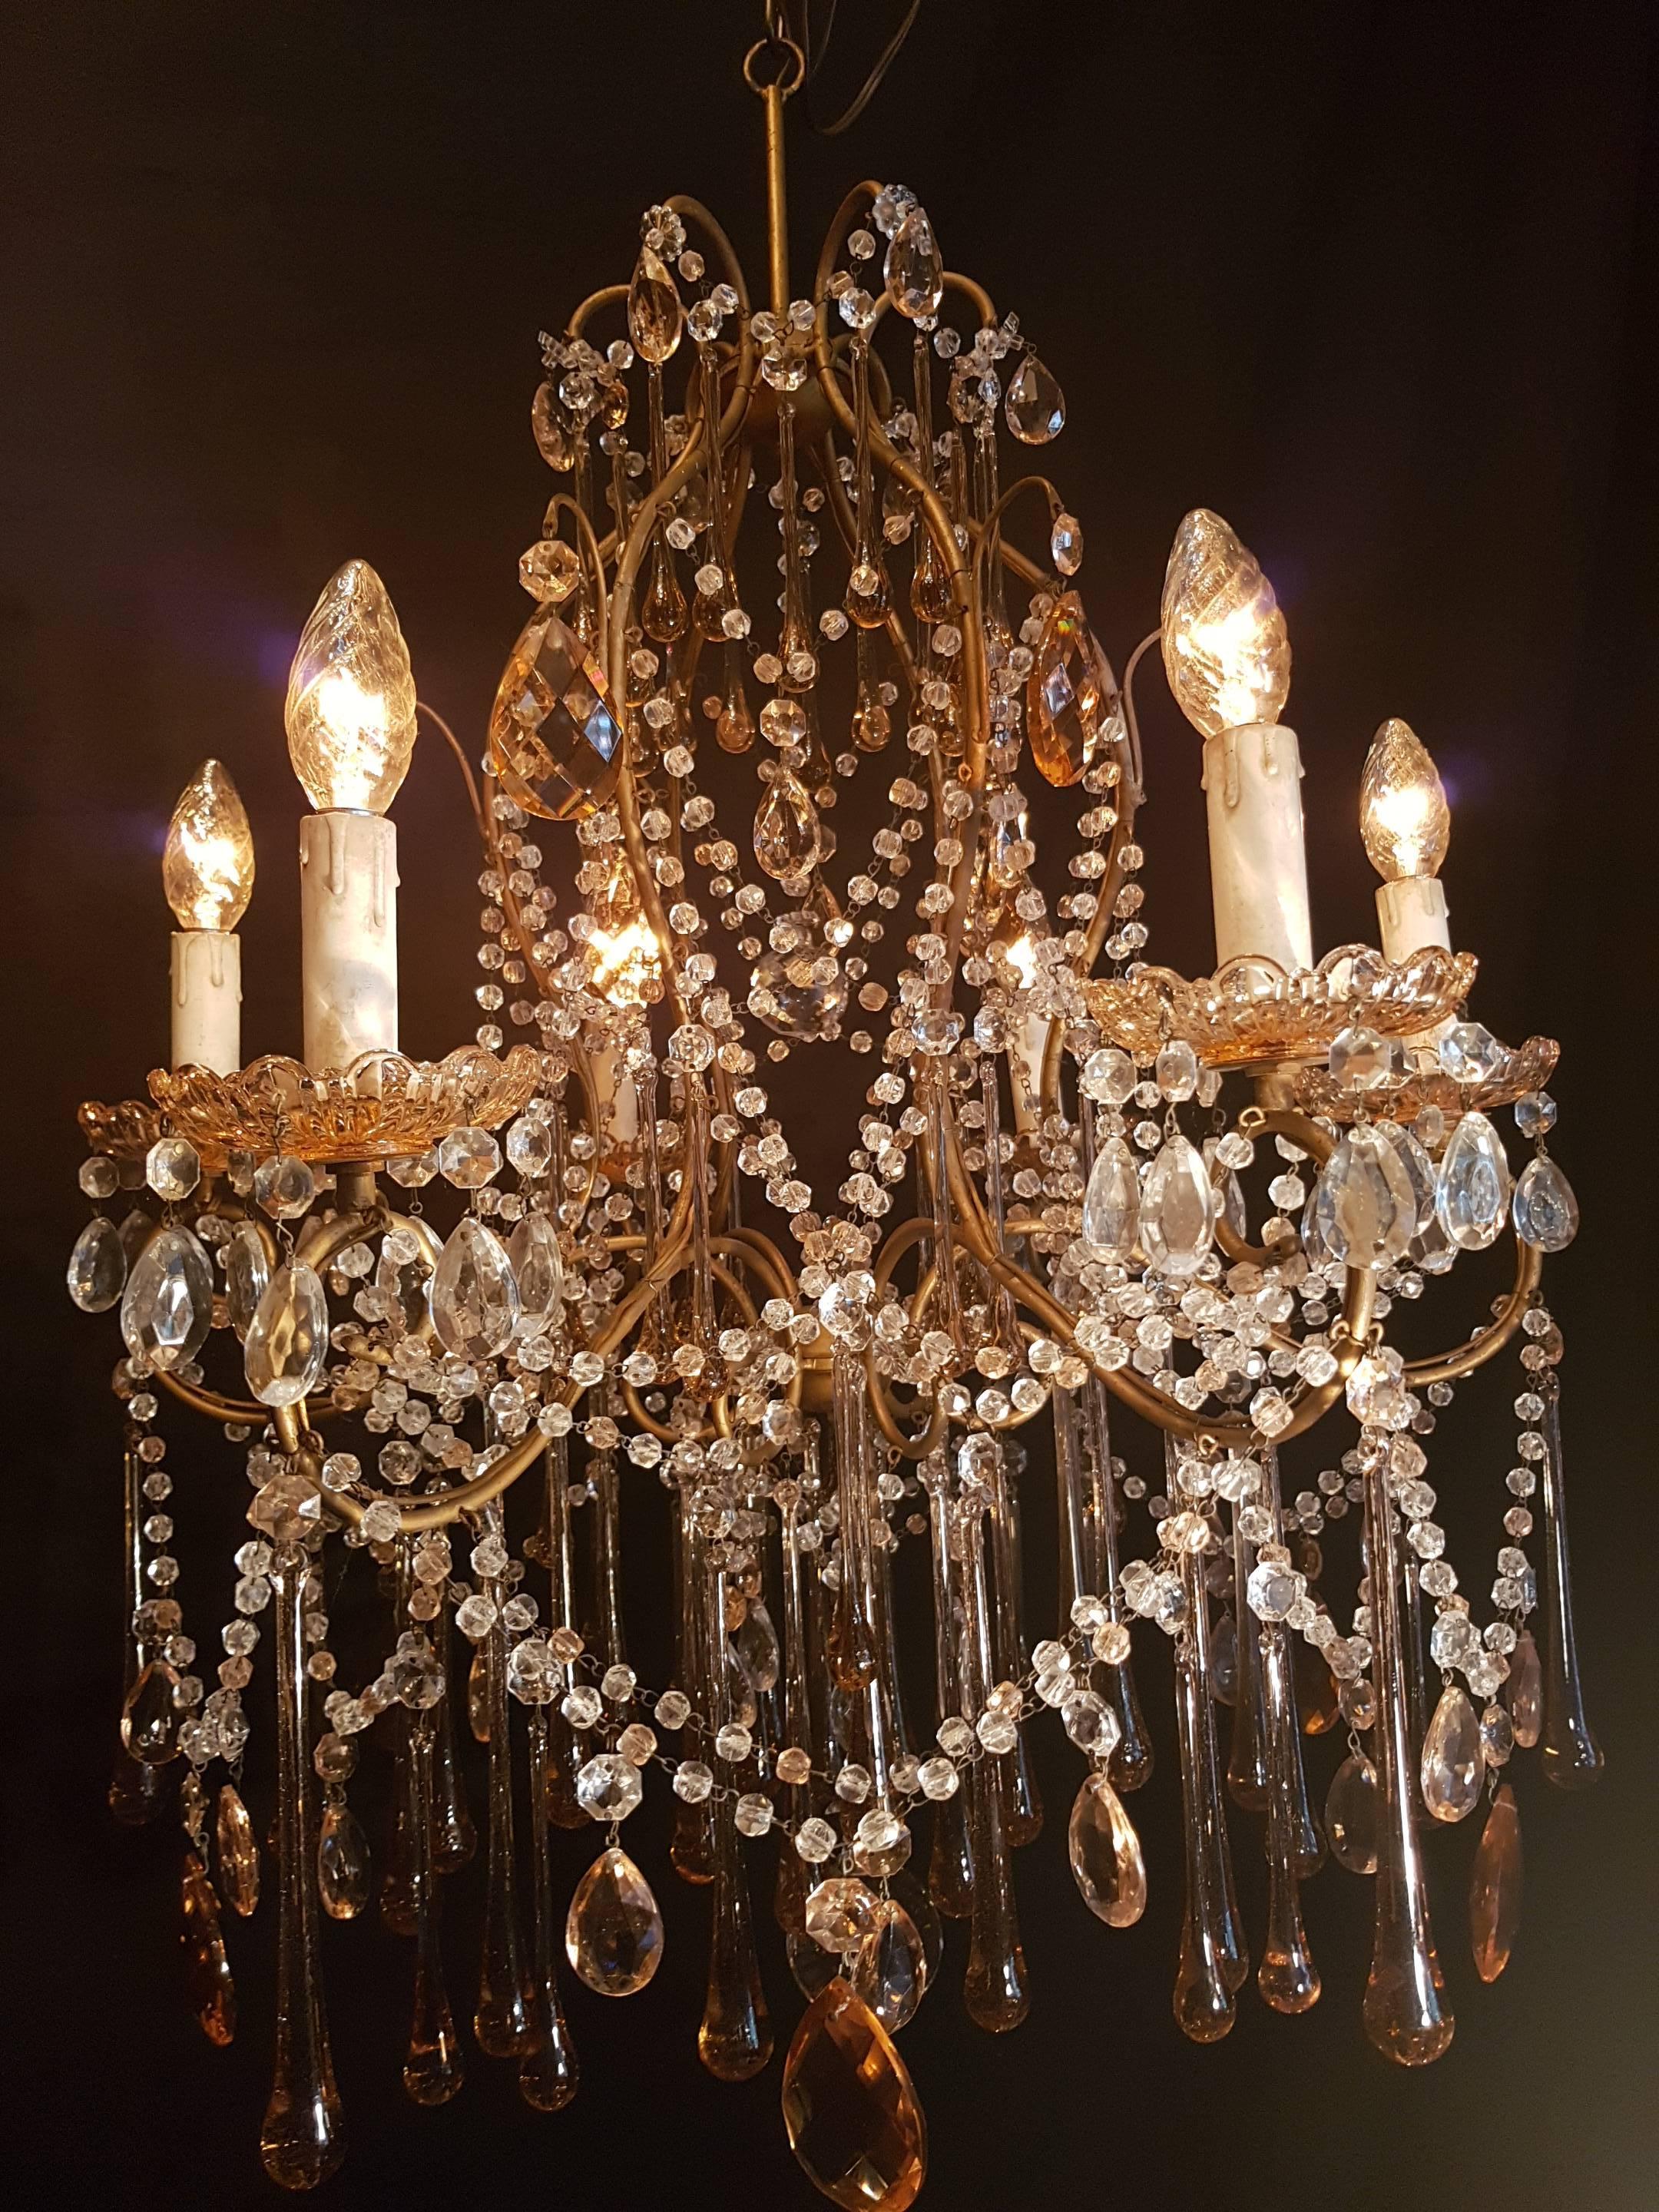 20th century six-light Italian gilt-metal chandelier with crystals and big glass drops in salmon color. Also the bobeches are in the same color and so are some of the beads in the strings. Very rare and richly decorated piece.